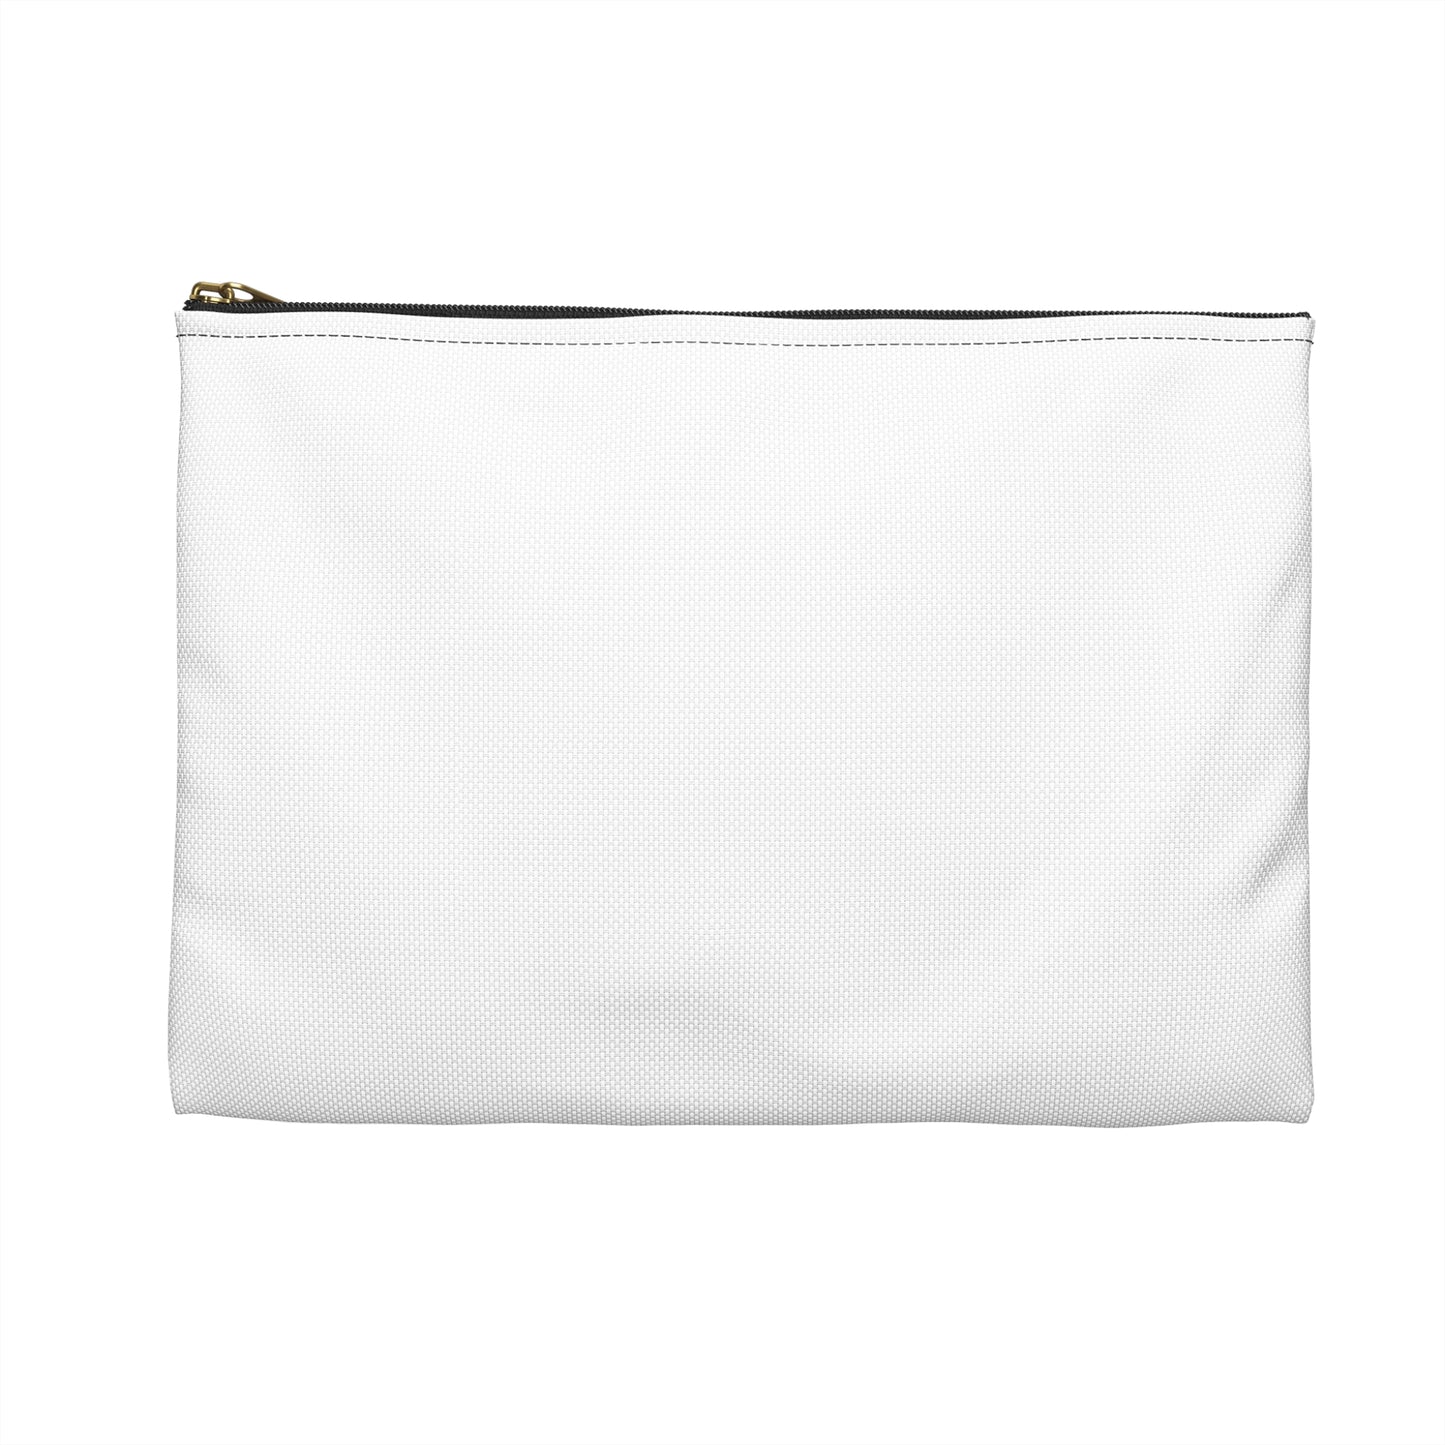 The Invincibles Team Two Accessory Pouch